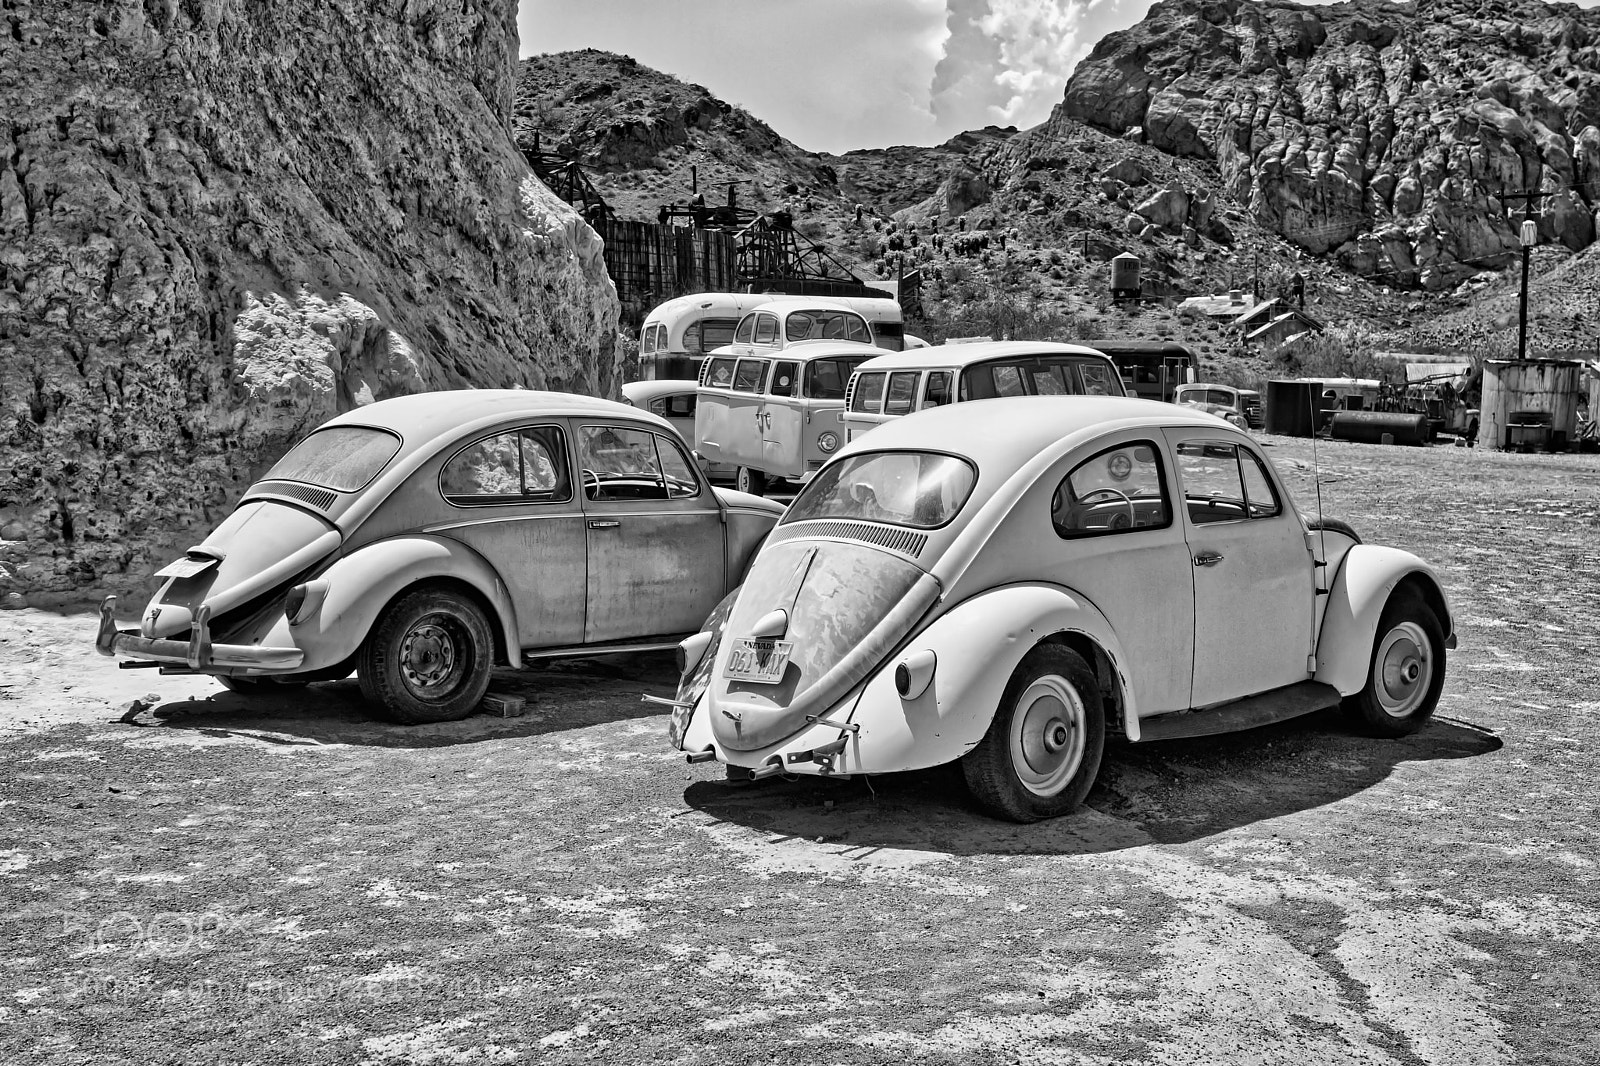 Hasselblad Lunar sample photo. Old desert vw's in photography